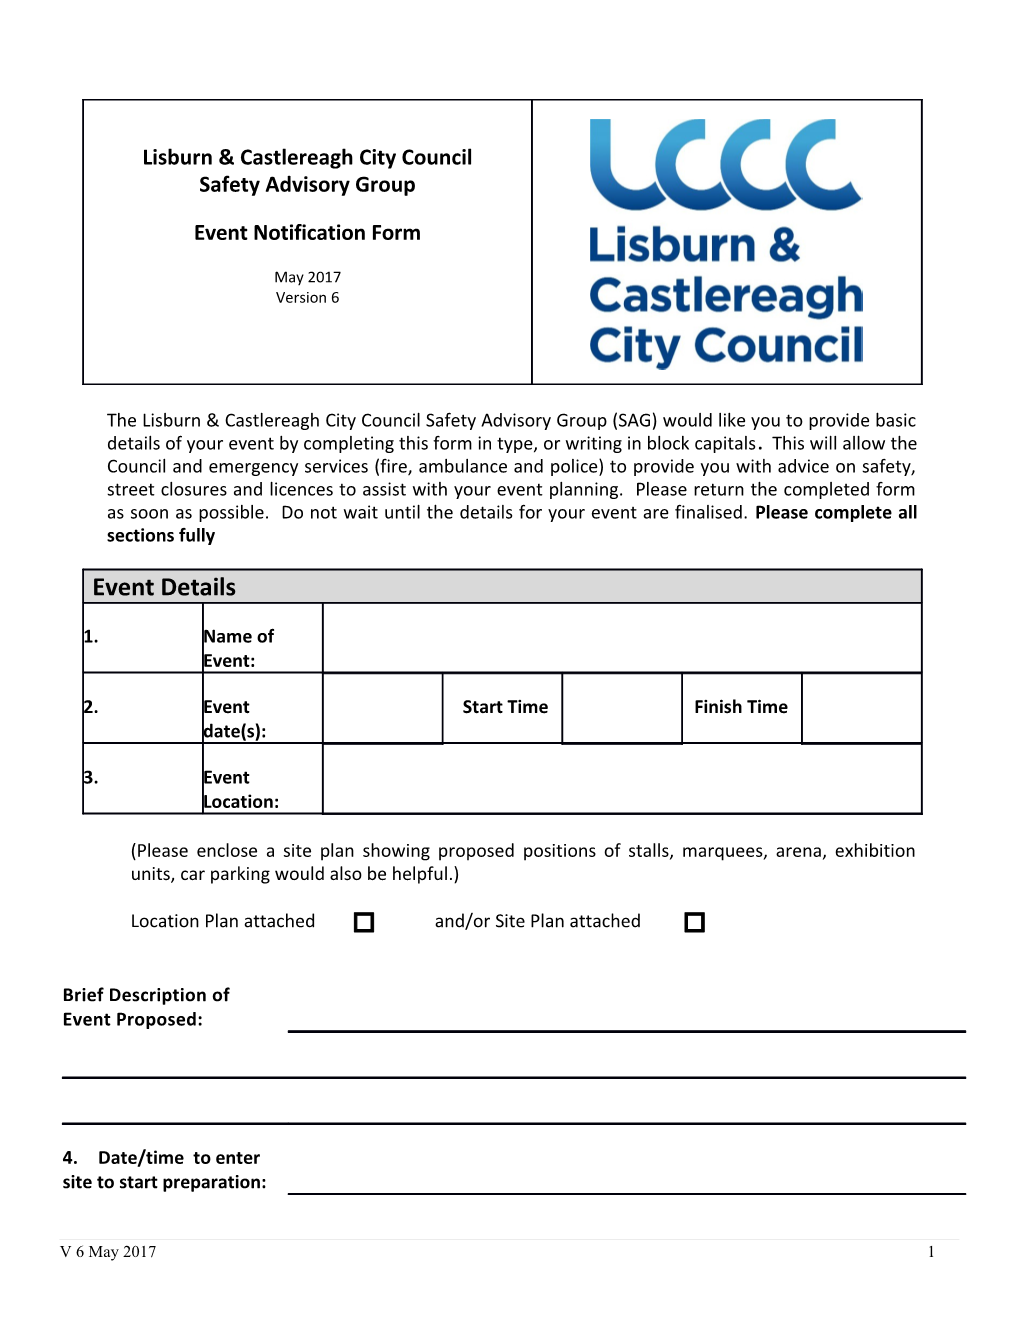 The Lisburncastlereaghcity Council Safety Advisory Group (SAG) Would Like You to Provide